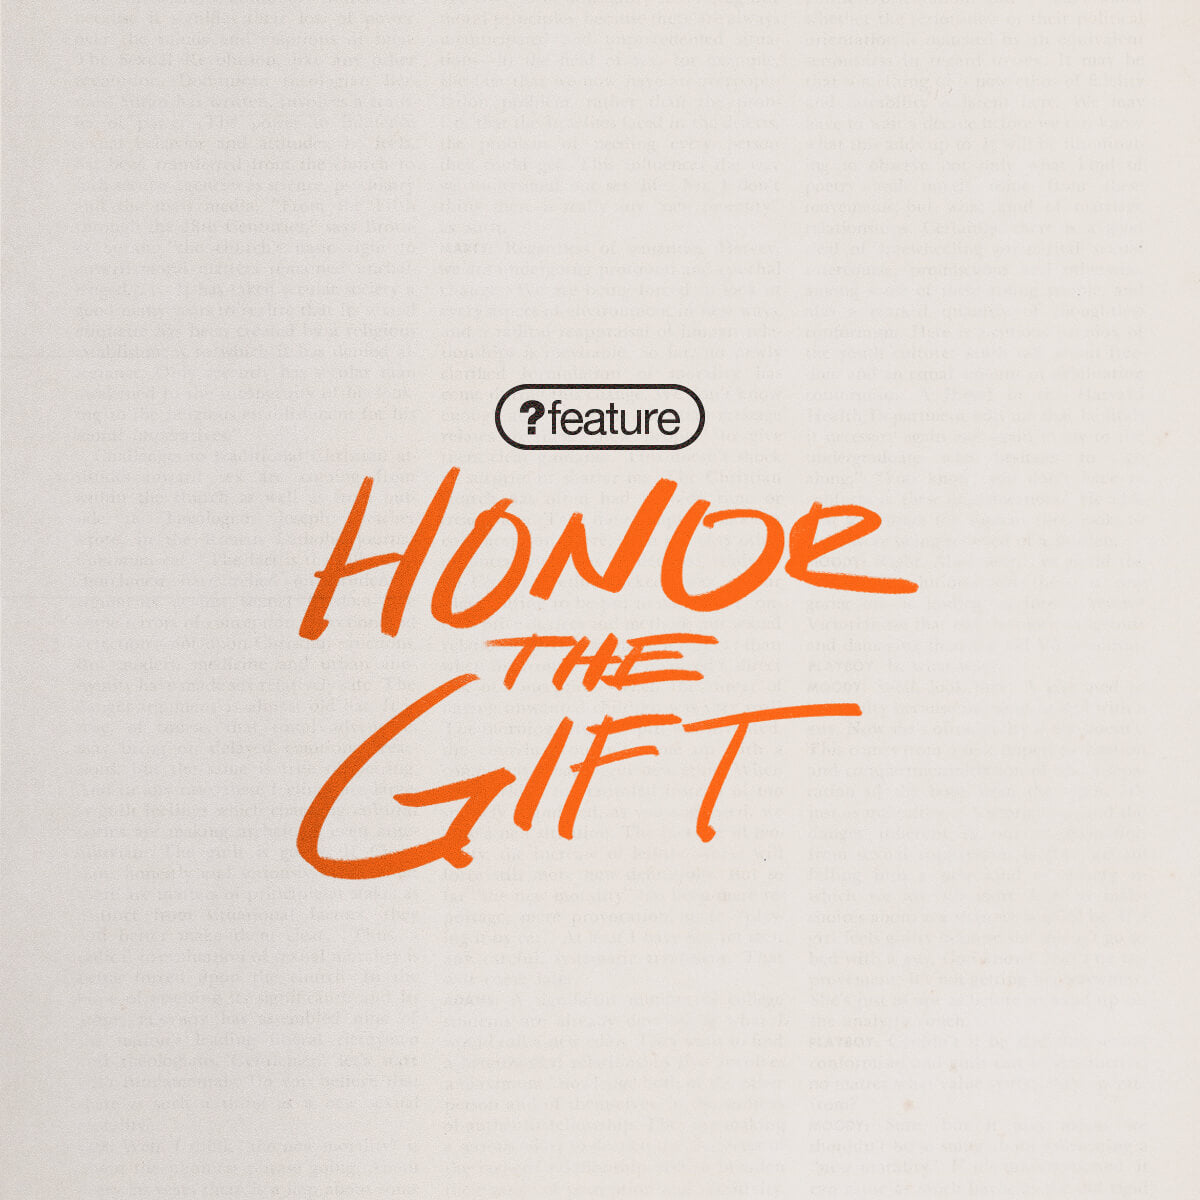 size?feature - Honor The Gift